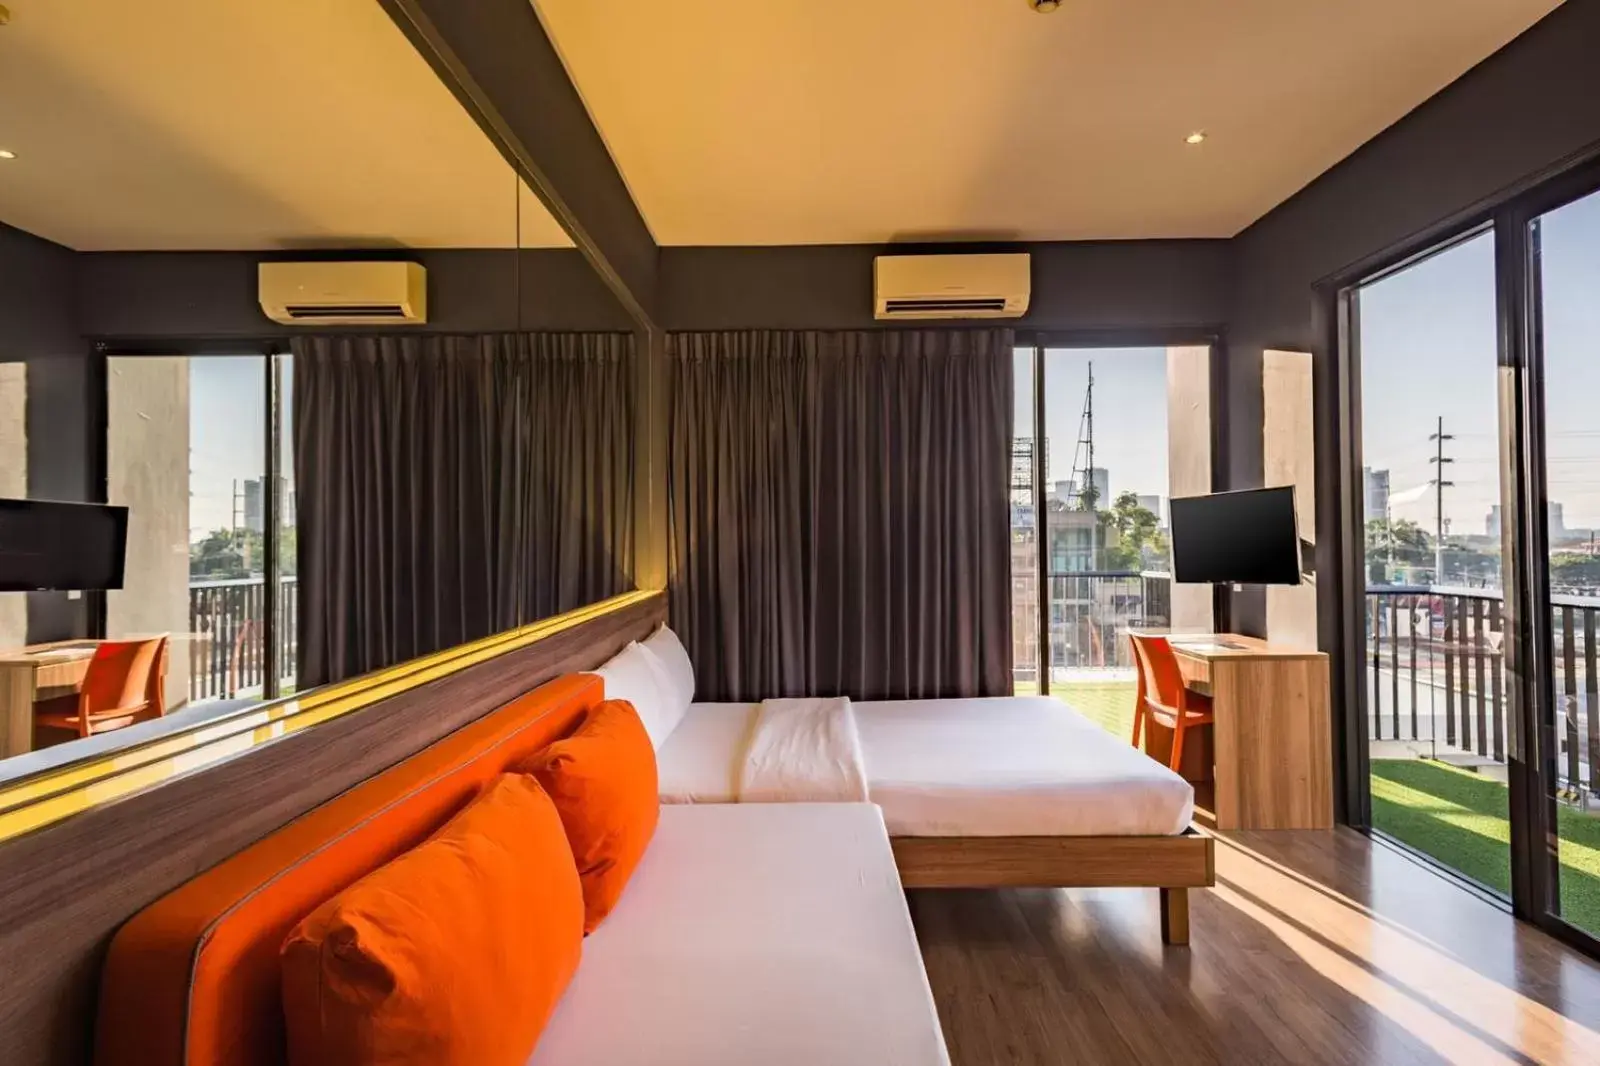 Bed, View in Azumi Boutique Hotel, Multiple Use Hotel Staycation Approved